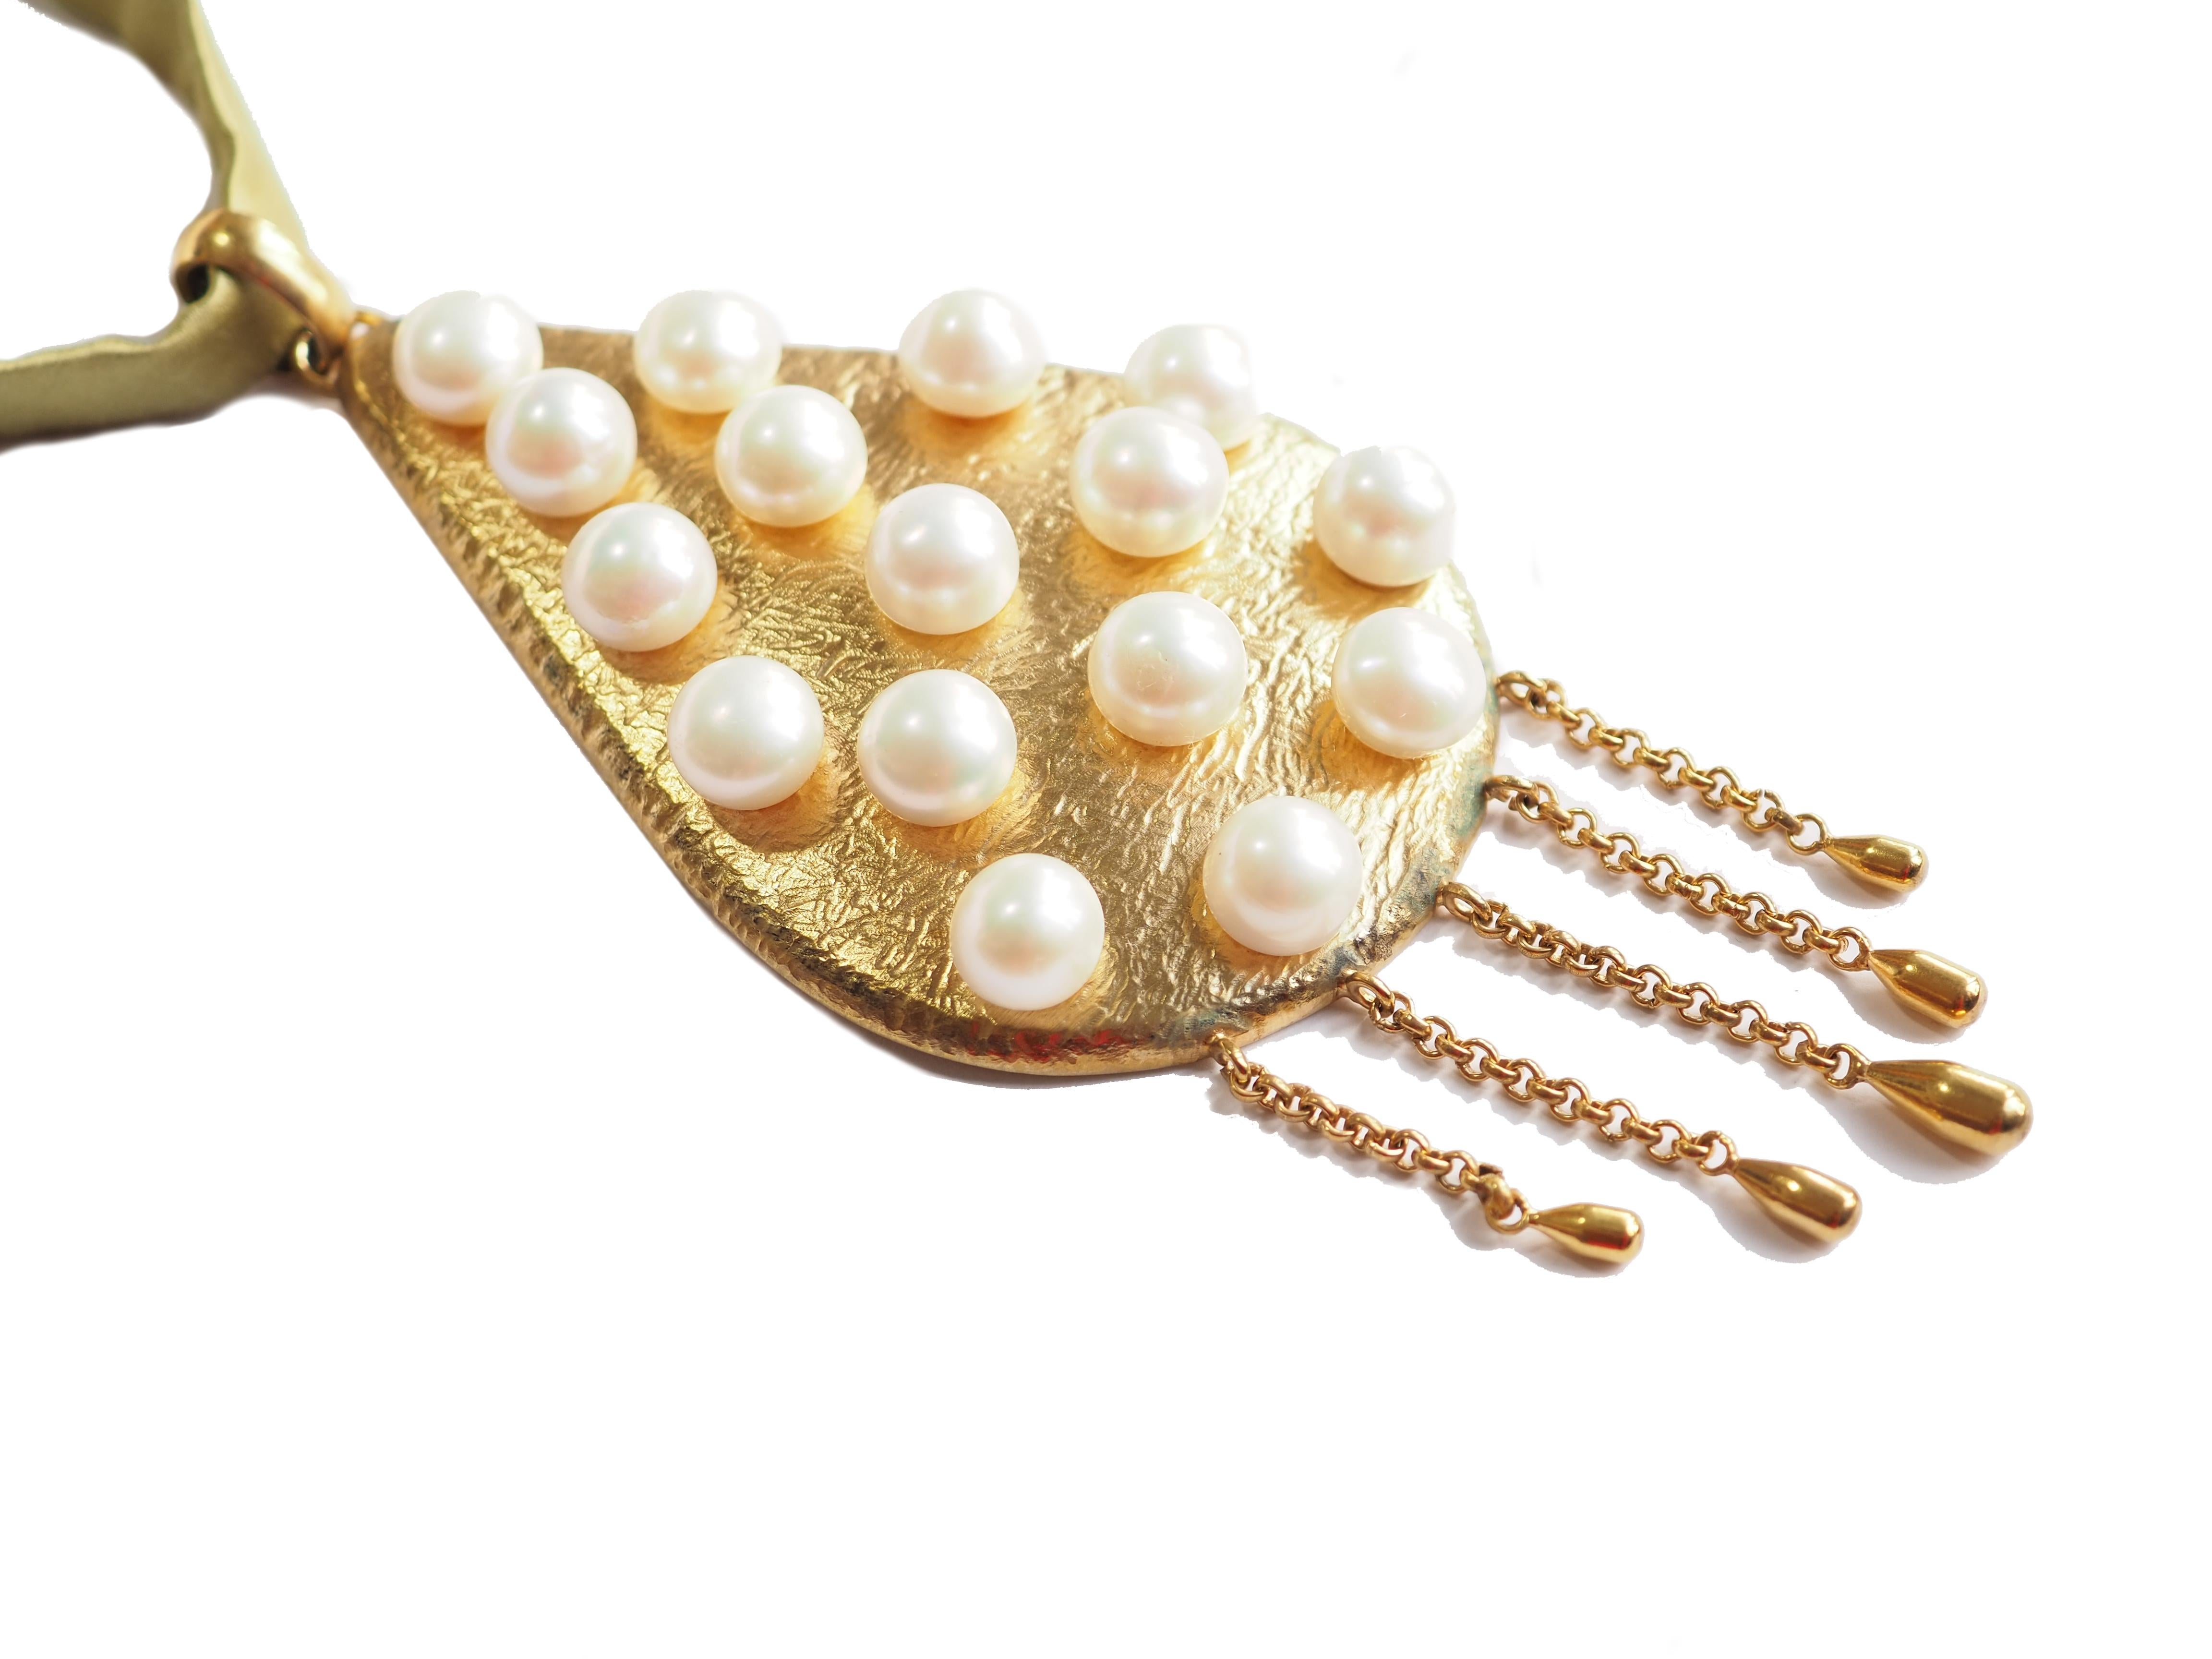 very nice pendant coming with silk band adjustable, hand made in bronze with white  natural pearls and little fringe and drop on the end.
The drop measures length 12cm max large 6cm.
All Giulia Colussi jewelry is new and has never been previously